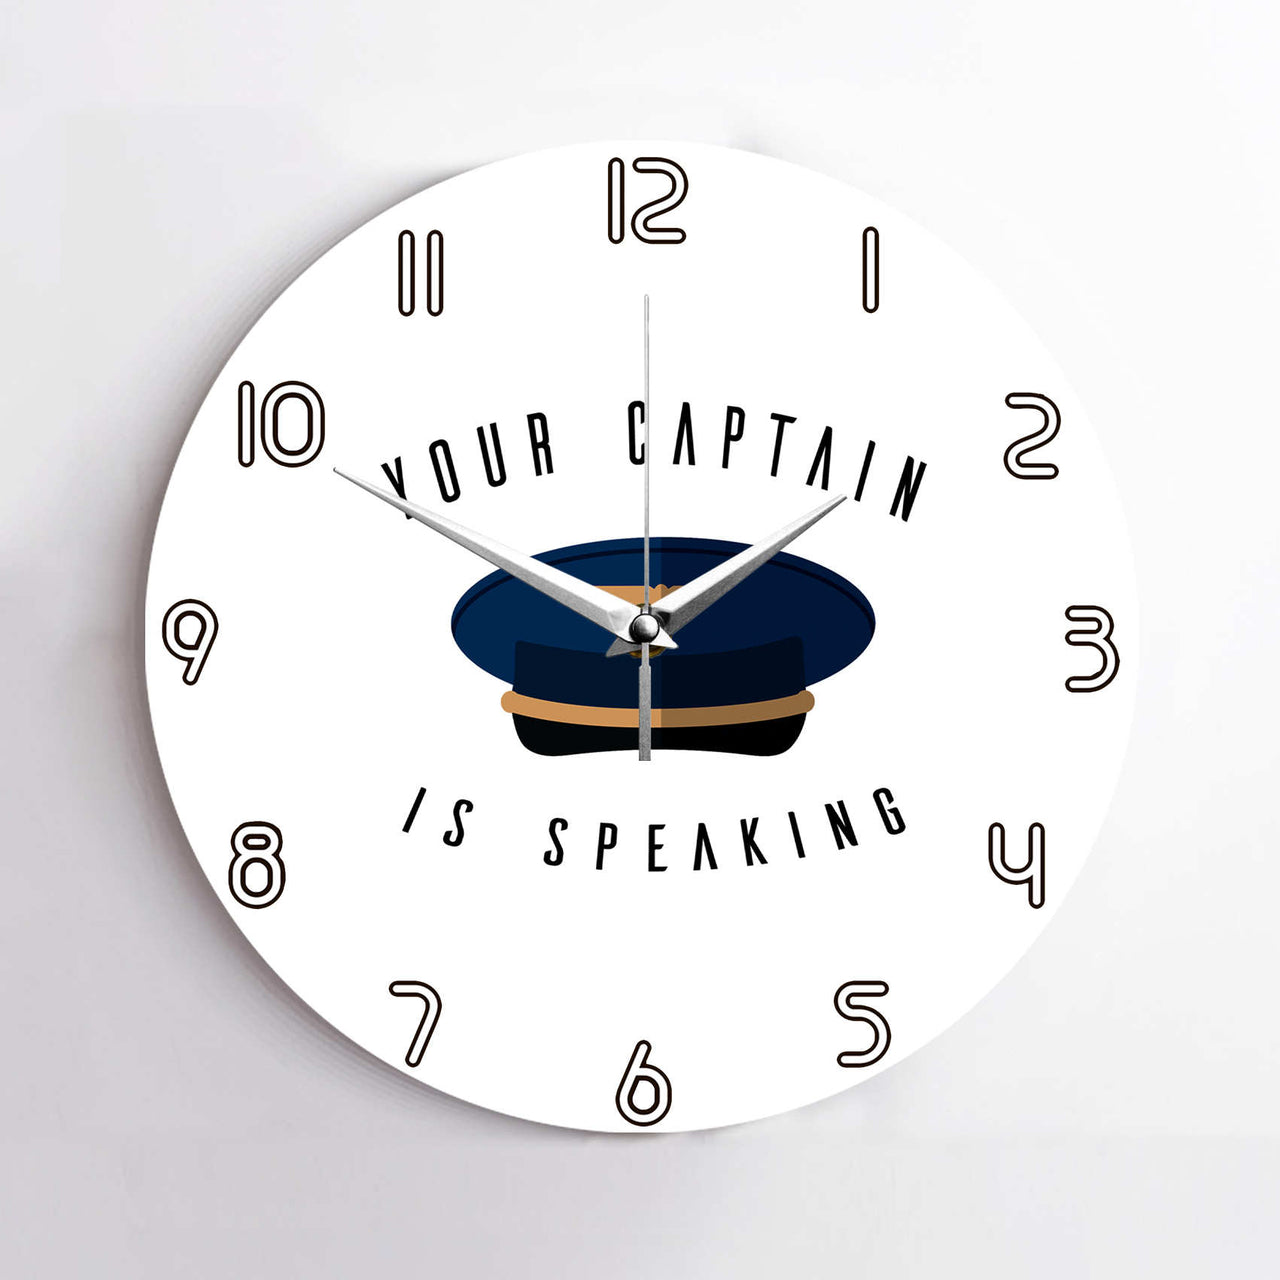 Your Captain Is Speaking Designed Wall Clocks